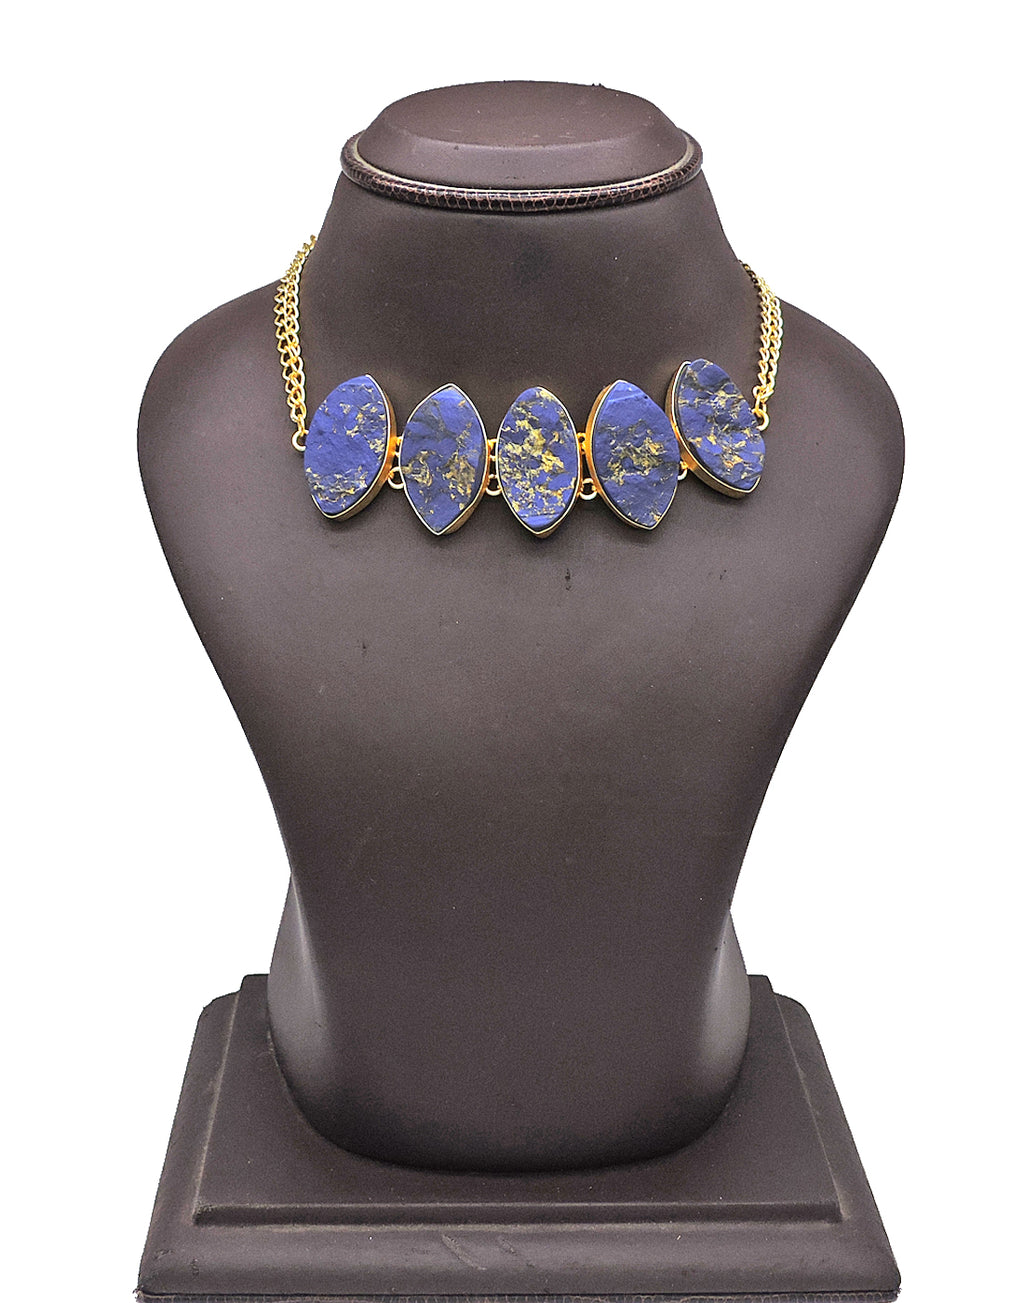 Blue Bhatti Necklace - Statement Necklaces - Gold-Plated & Hypoallergenic Jewellery - Made in India - Dubai Jewellery - Dori